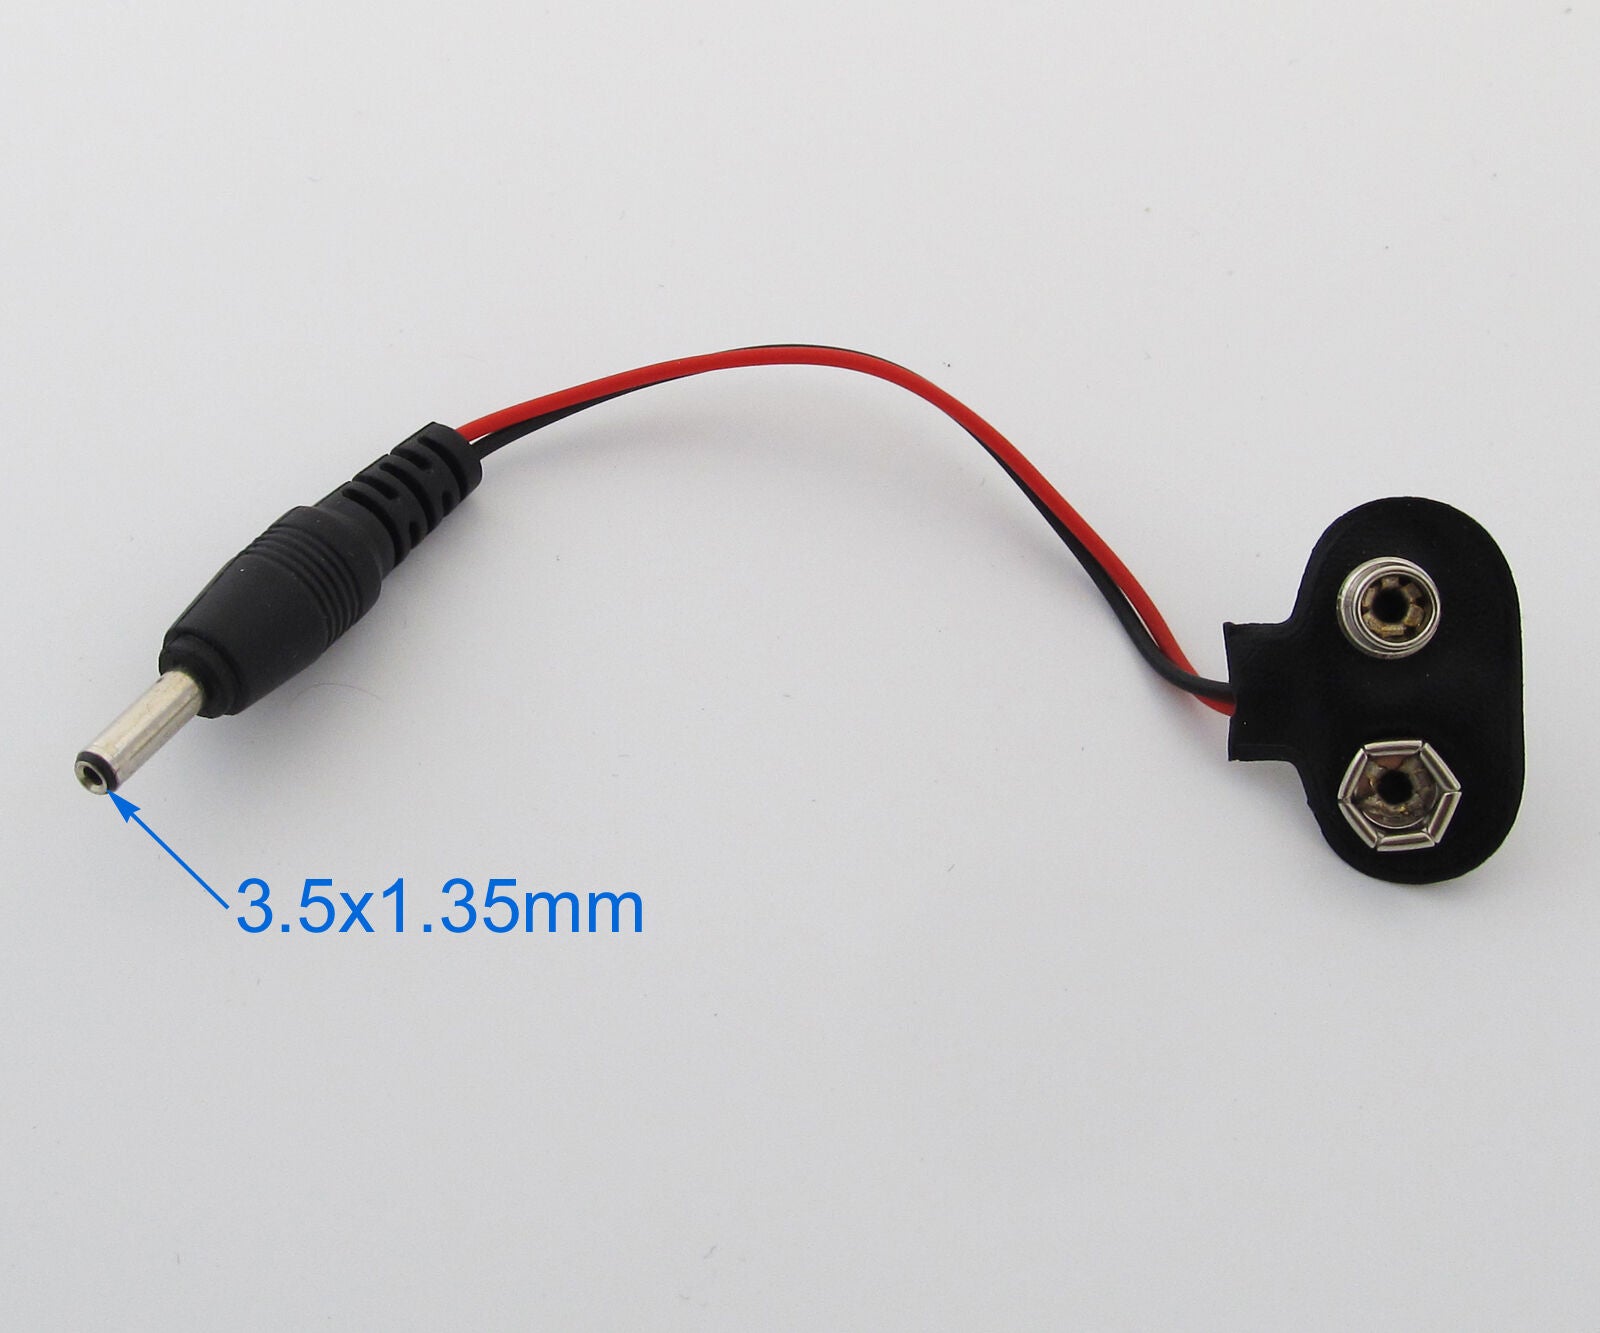 100pcs 9V CCTV Cam/Camera Battery Snap T-Type cable with 3.5*1.35mm Male DC Plug